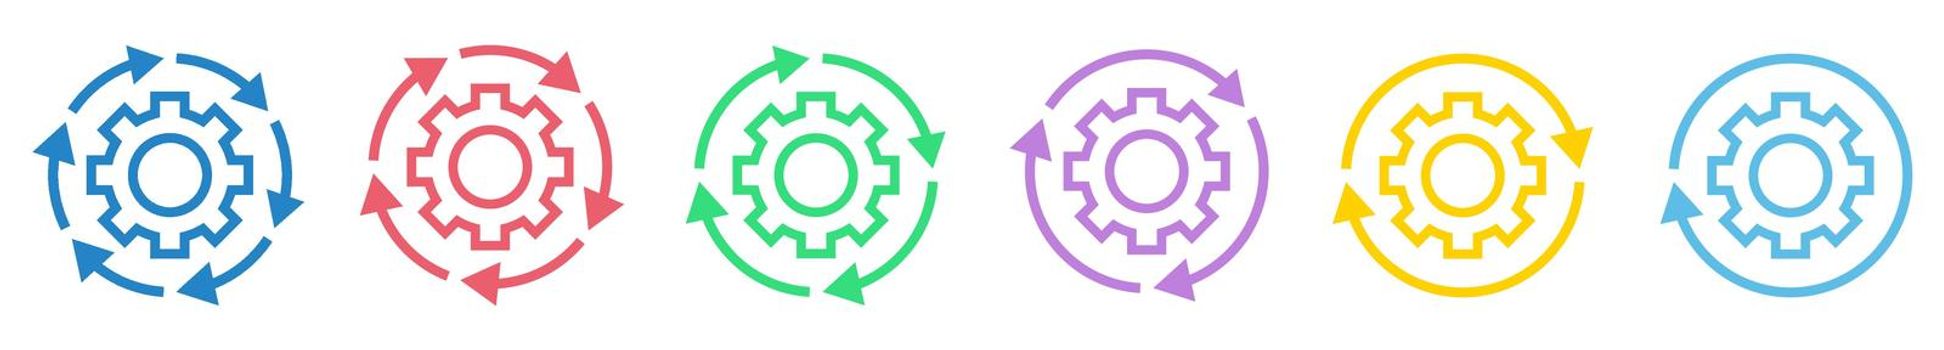 Workflow linear icon. Gears with arrows. Vector illustration.